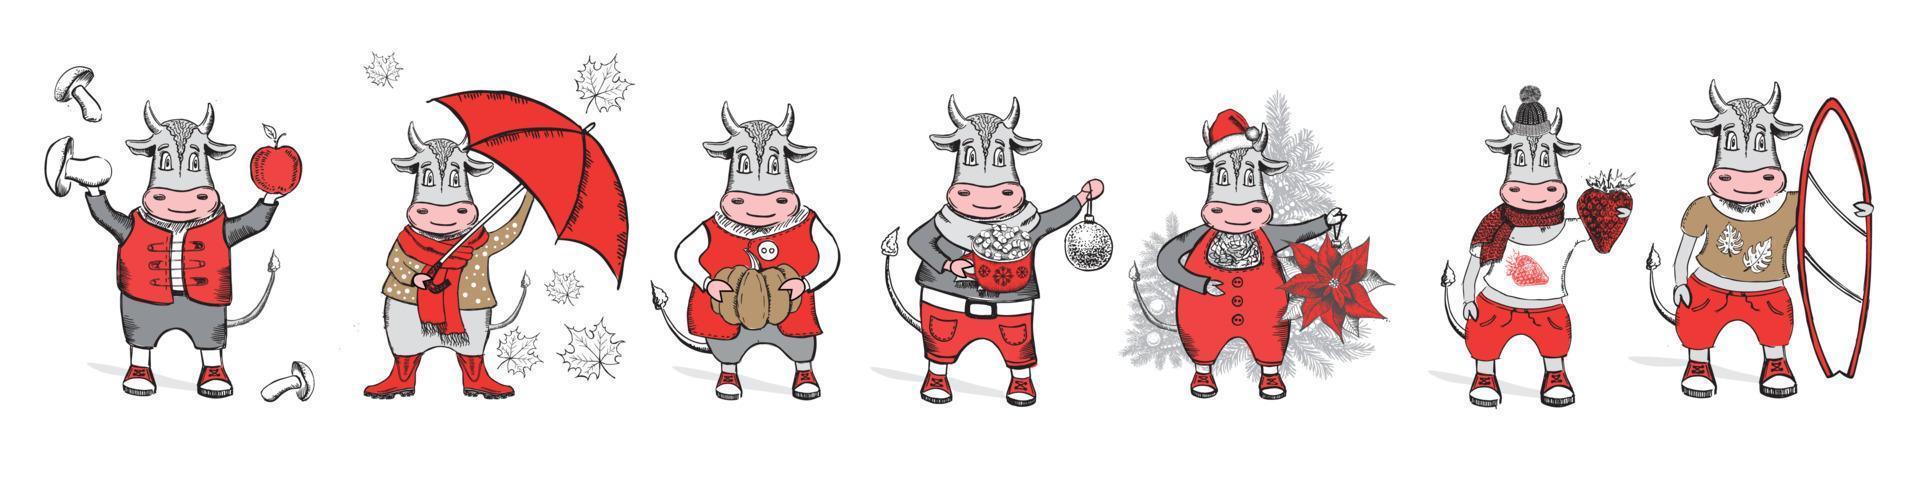 Year of the bull. New year illustration. Hand drawn vector. vector